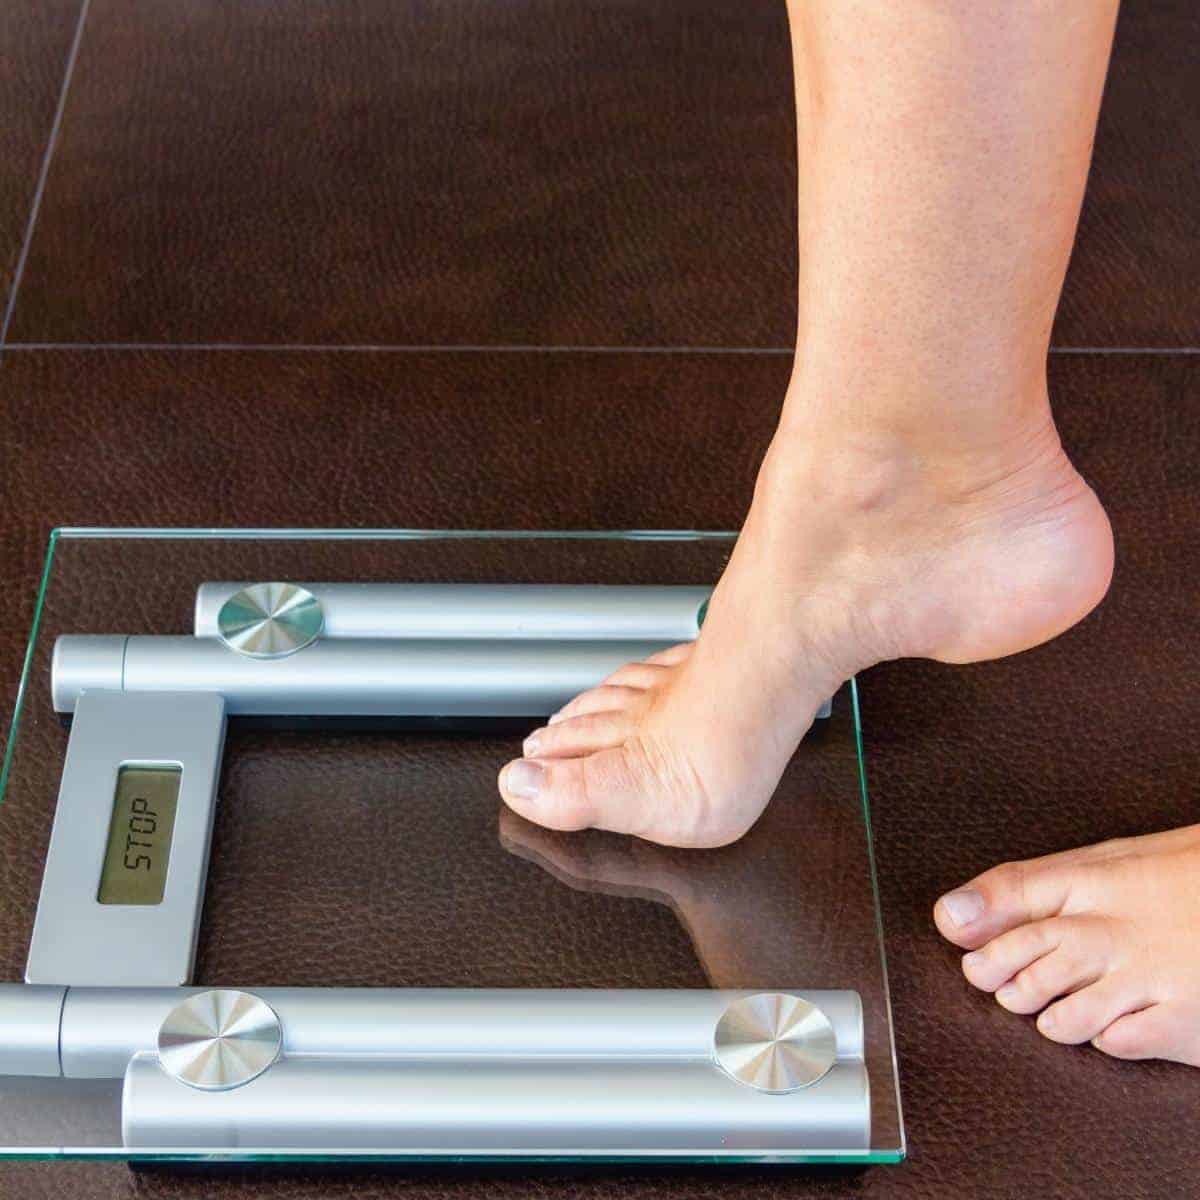 Finding the best support for your weight issues